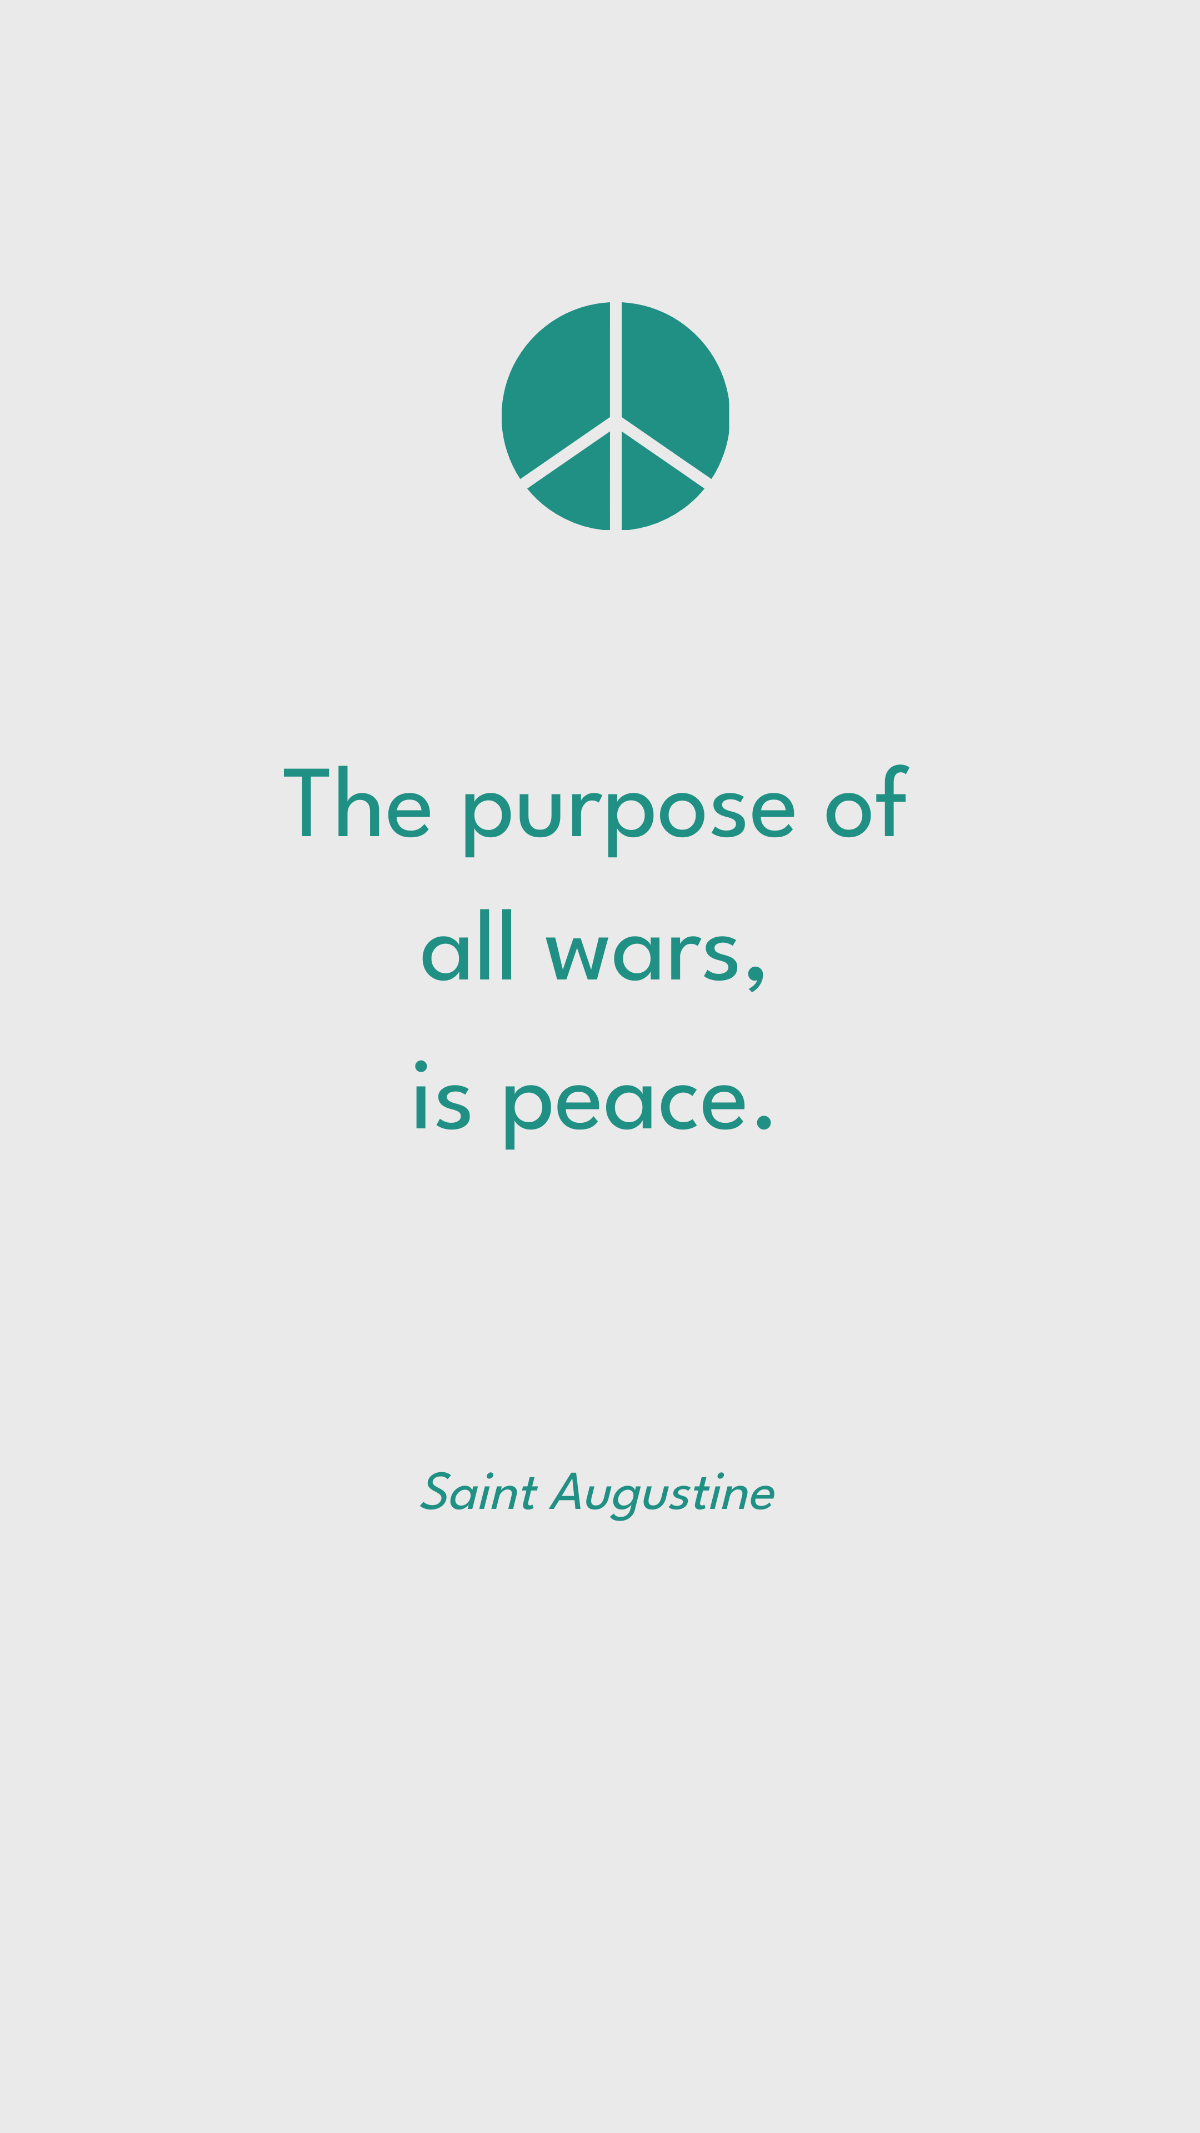 Free Saint Augustine - The purpose of all wars, is peace. Template